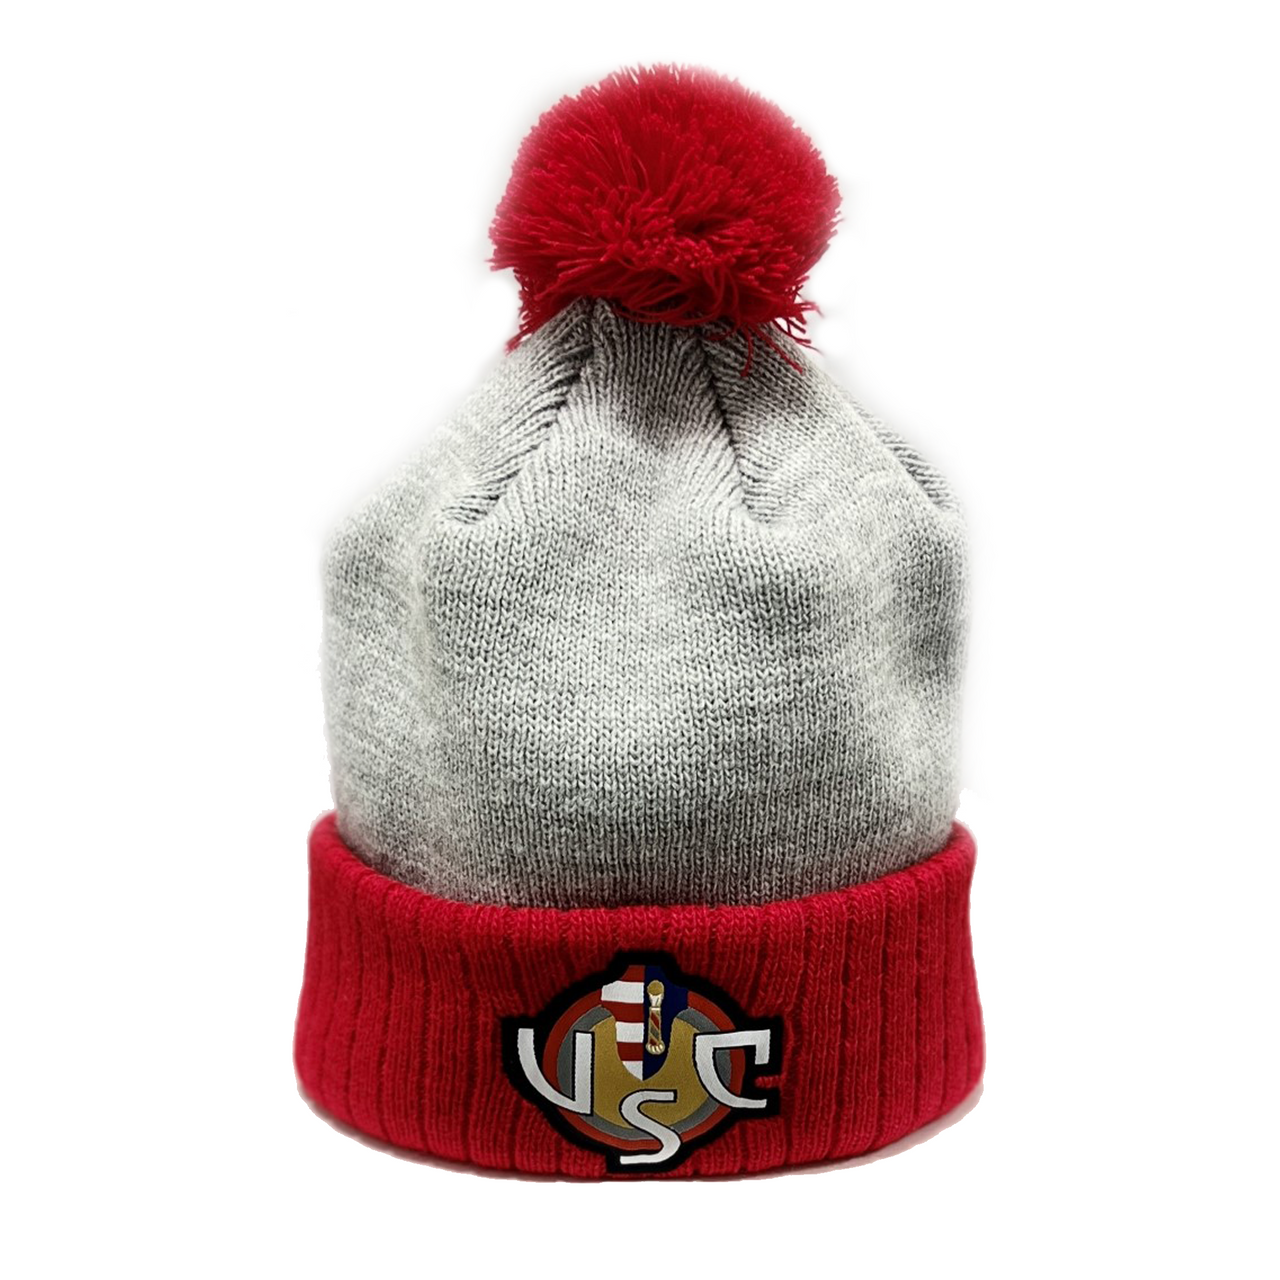 US Cremonese grey-red hat with pom pom